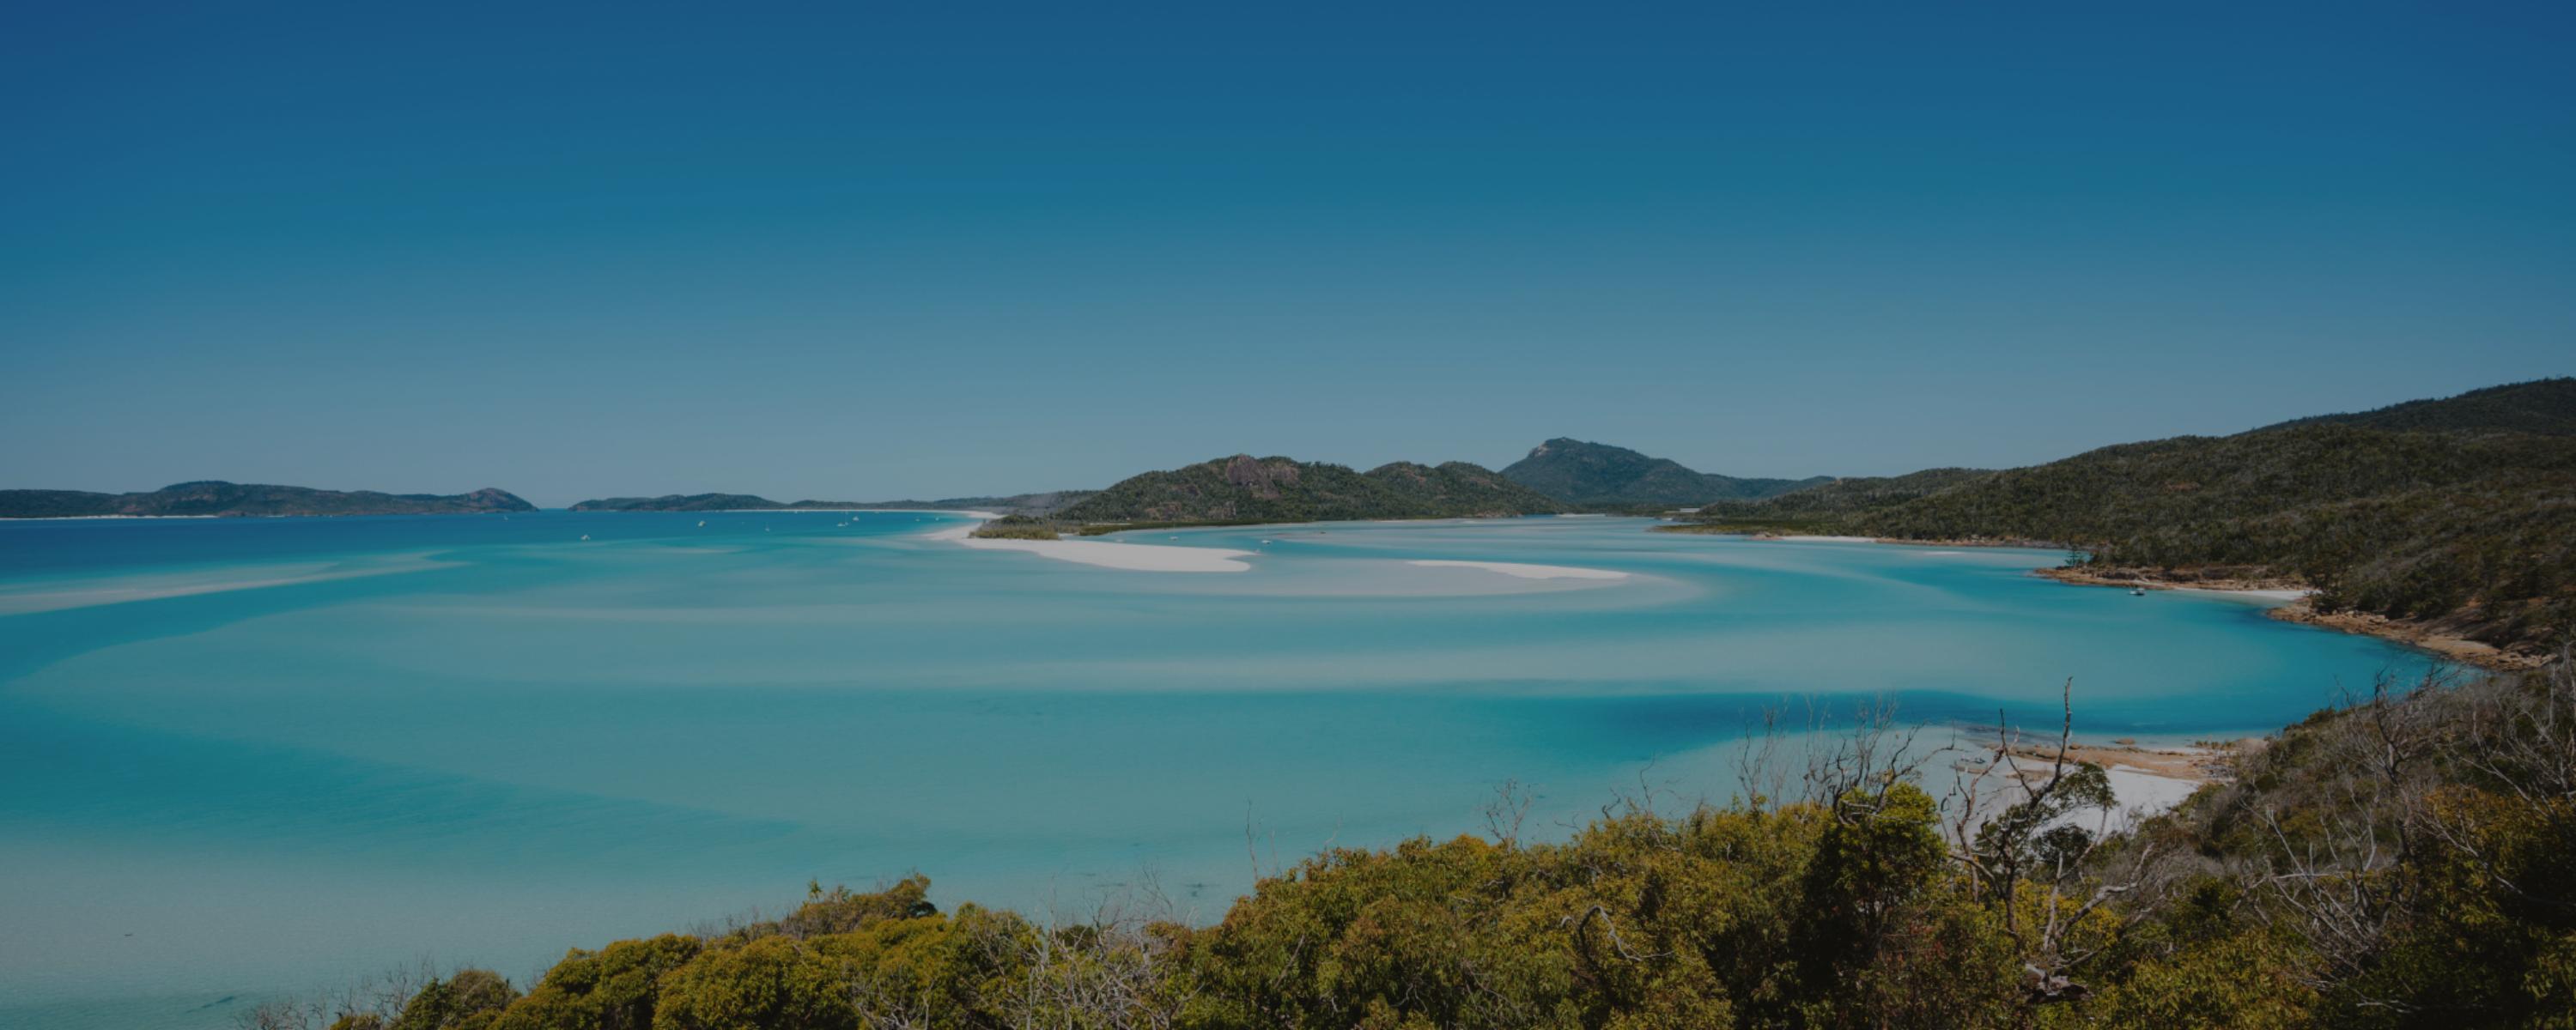 Luxury Escapes Guide to Airlie Beach & the Whitsundays